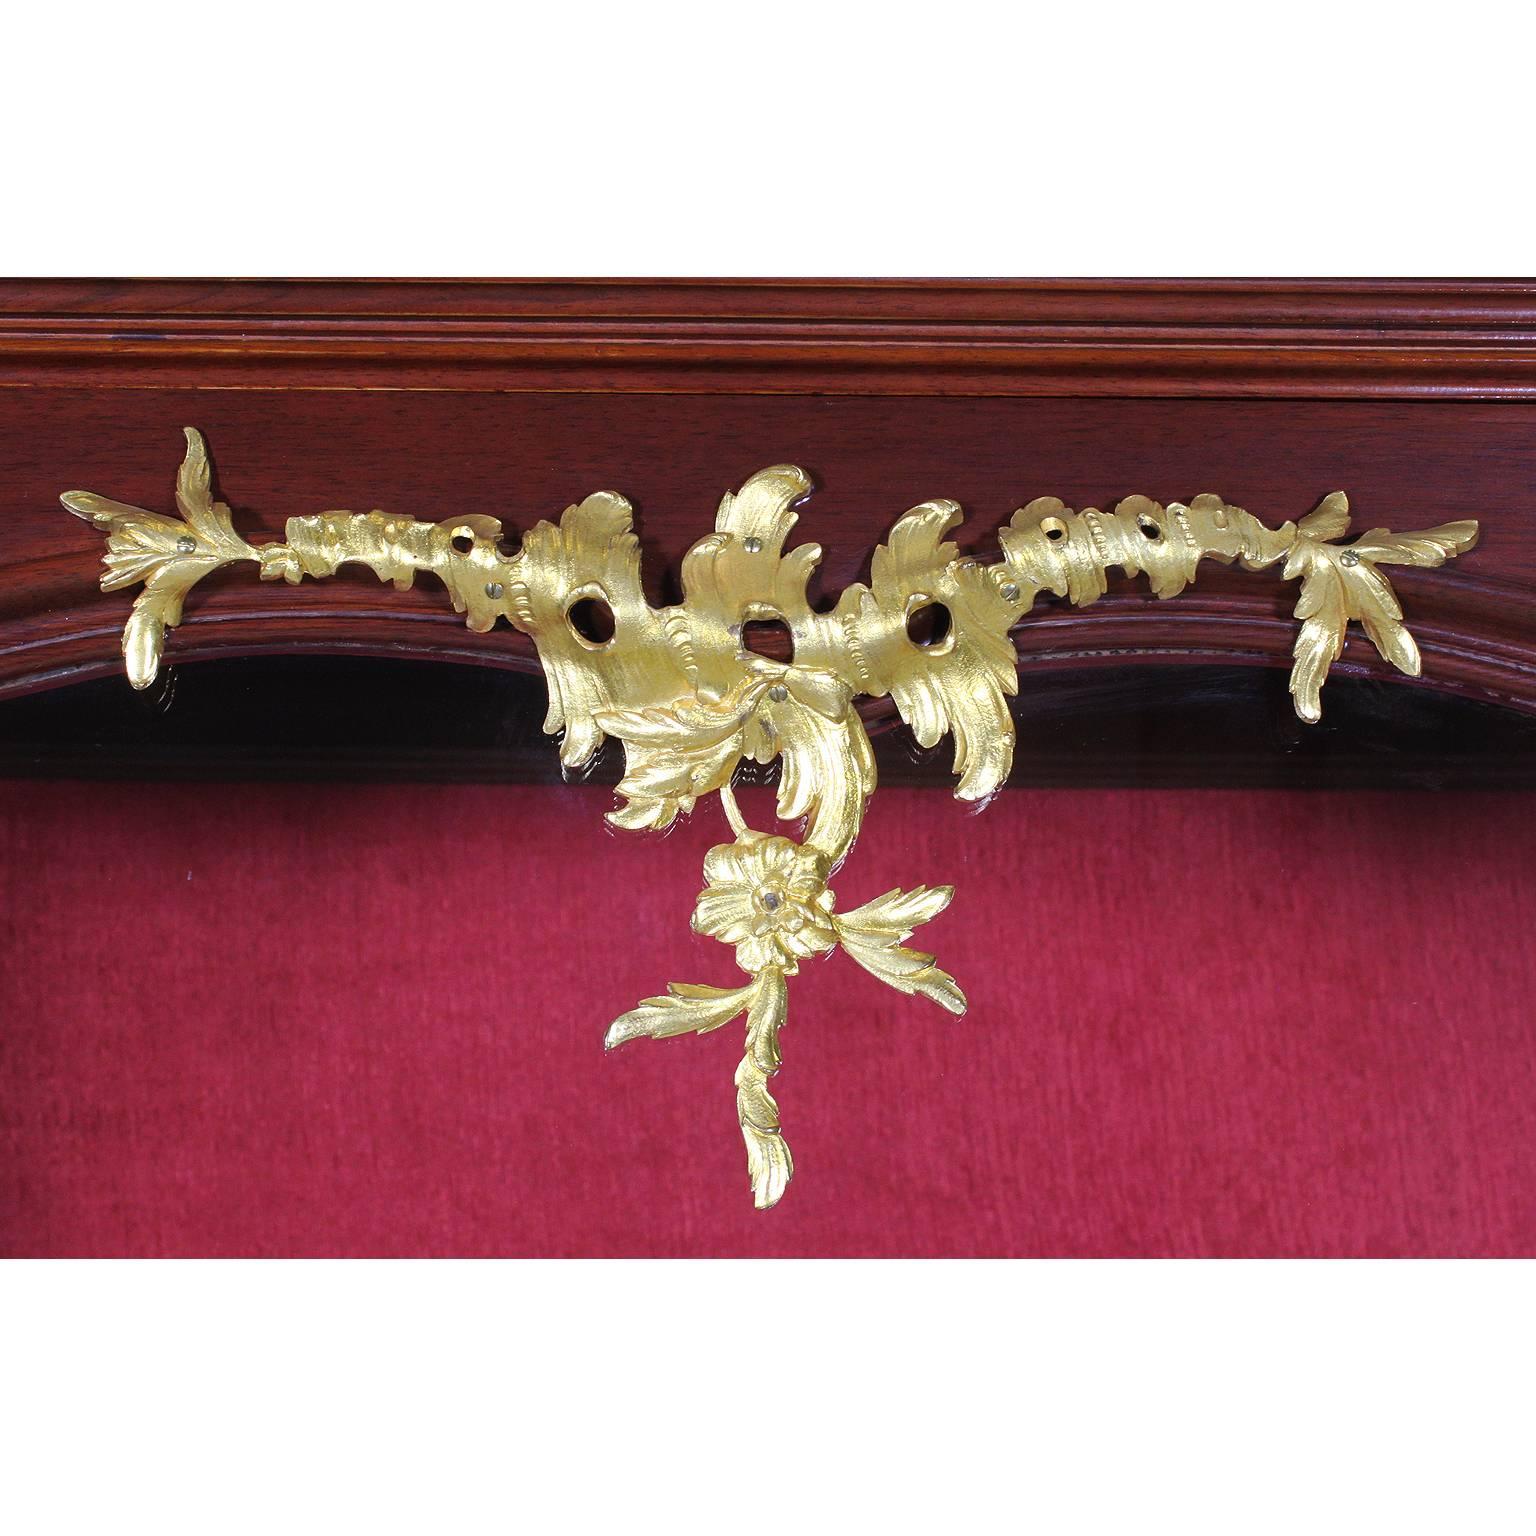 Carved French 19th-20th Century Louis XV Style Gilt Bronze Mounted Vitrine by Haentges